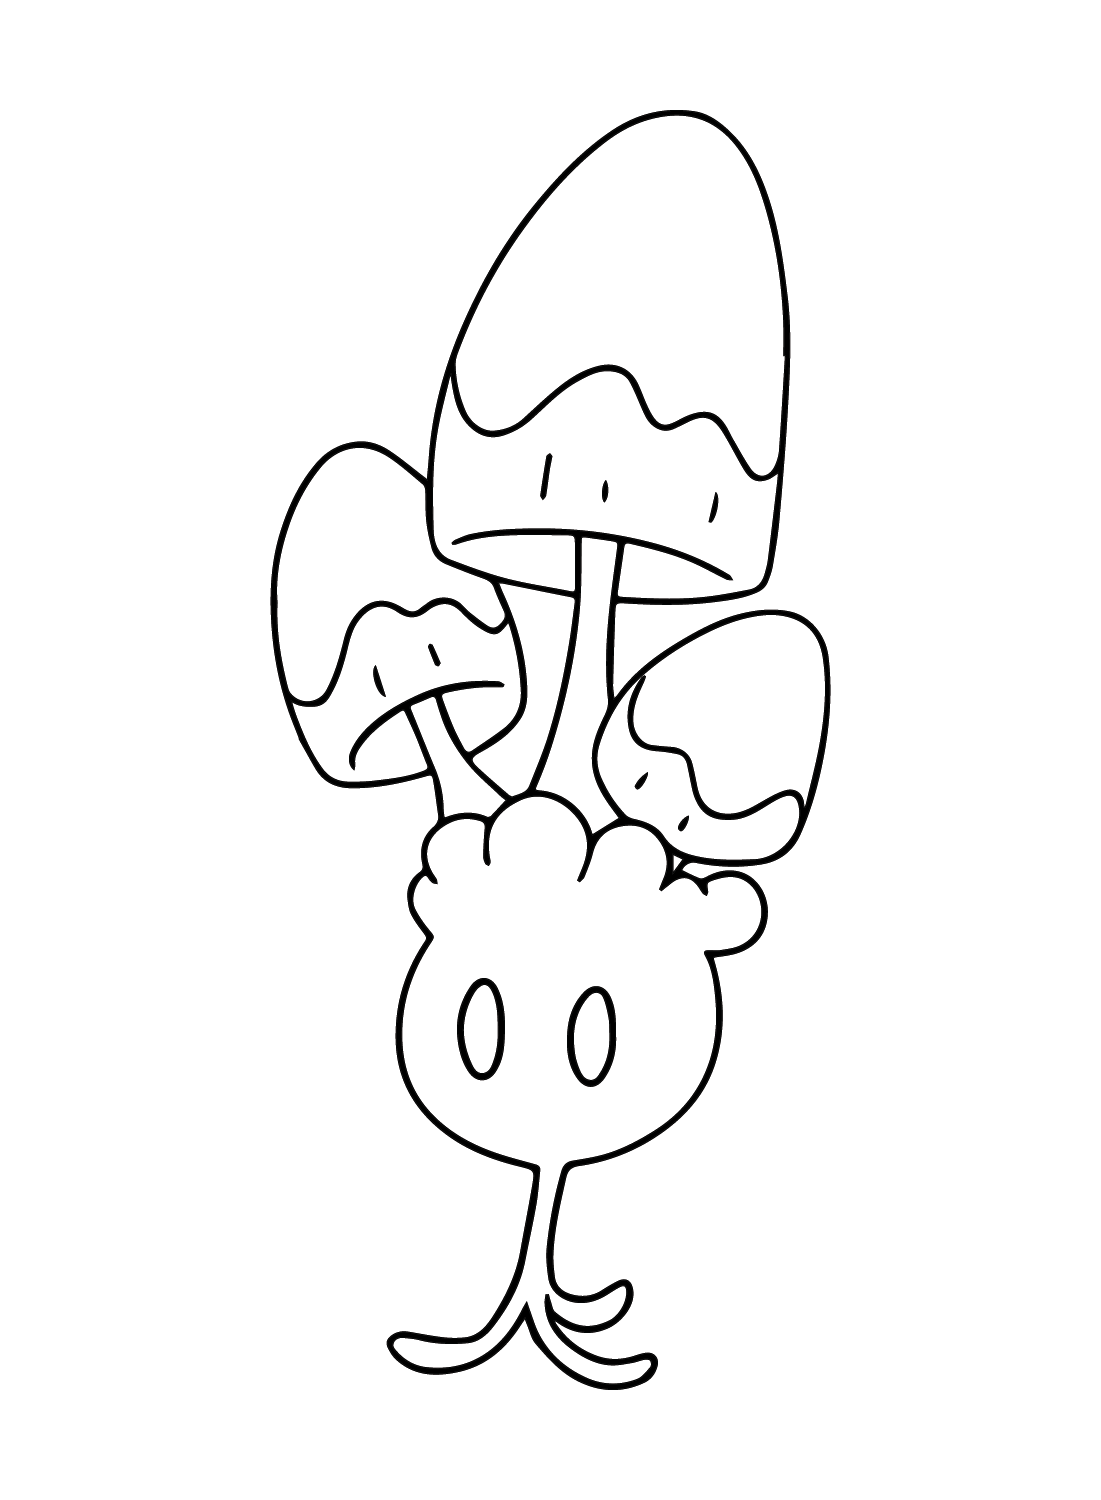 The Pokemon Morelull Coloring Page